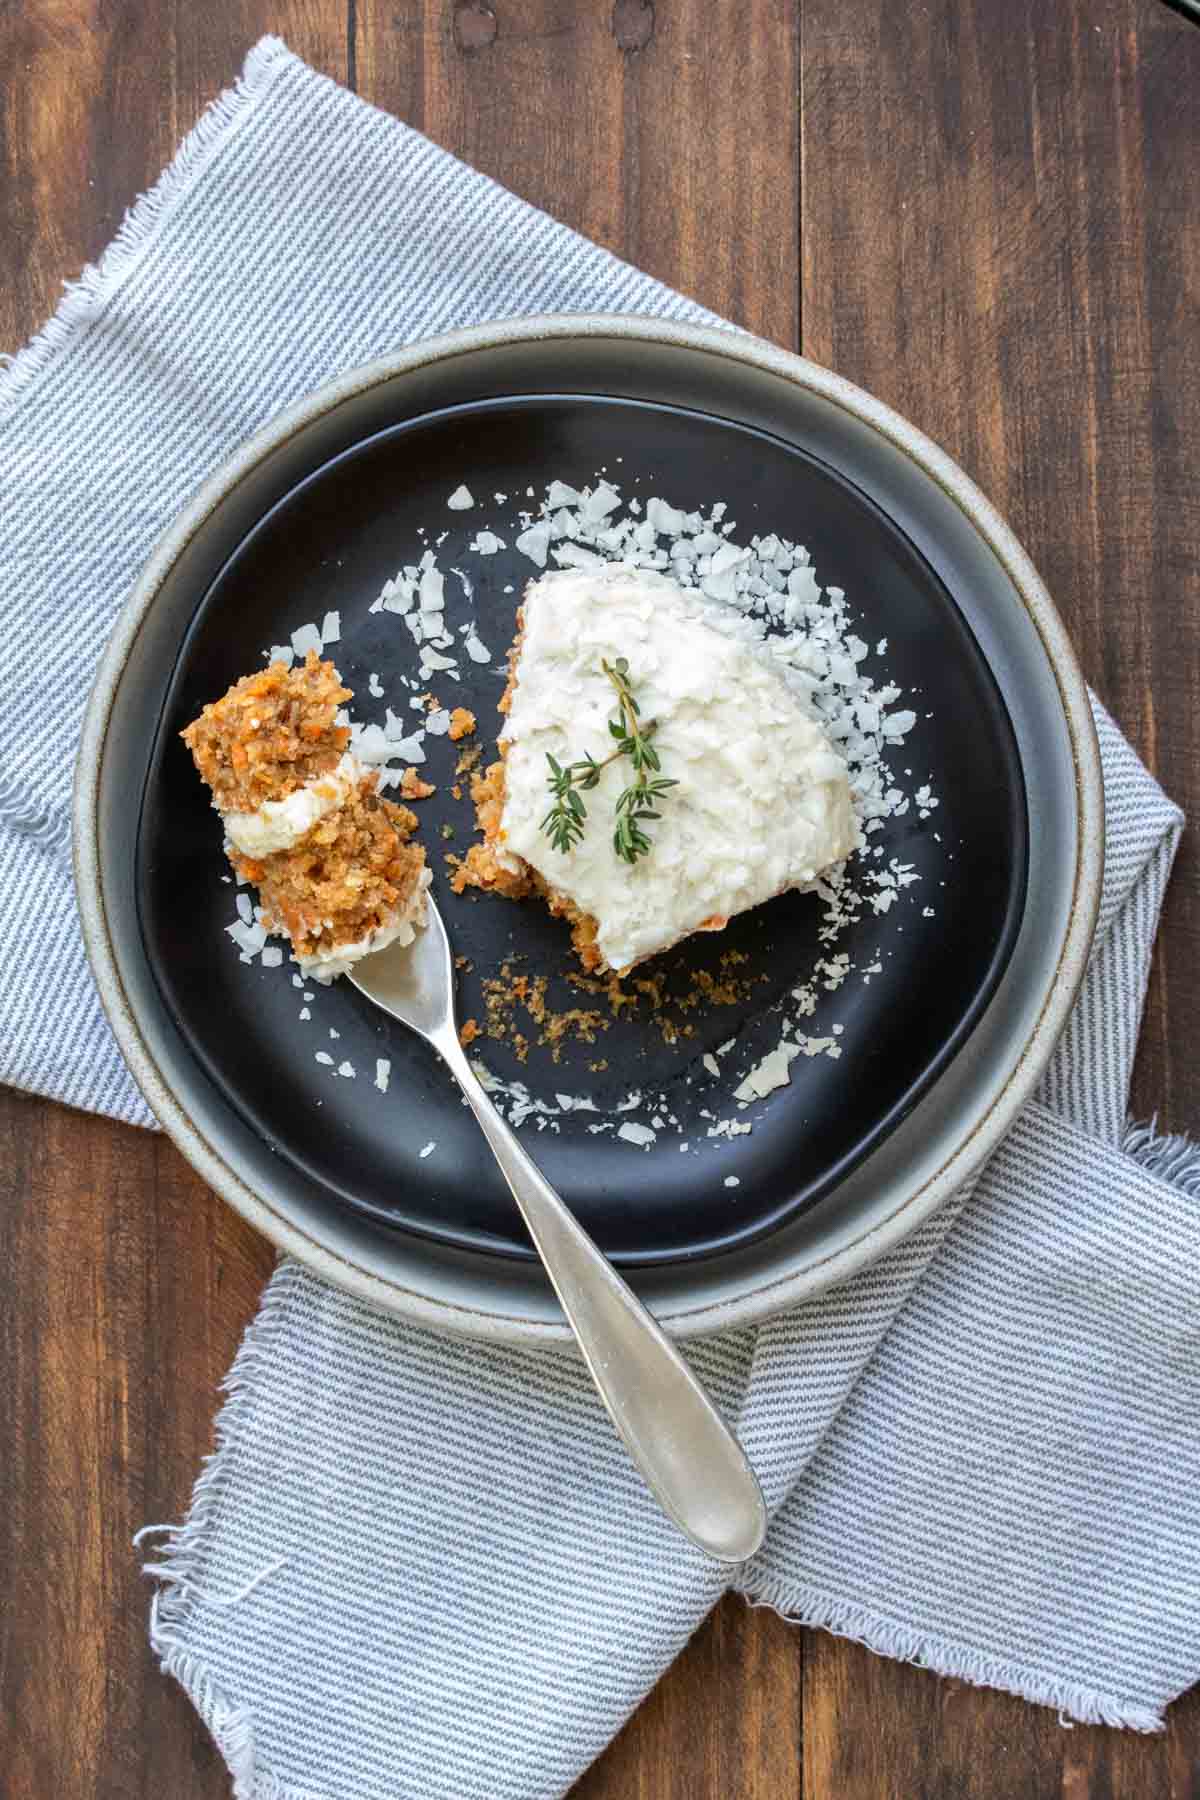 Top view of a fork with a bite of carrot cake on it on a black plate